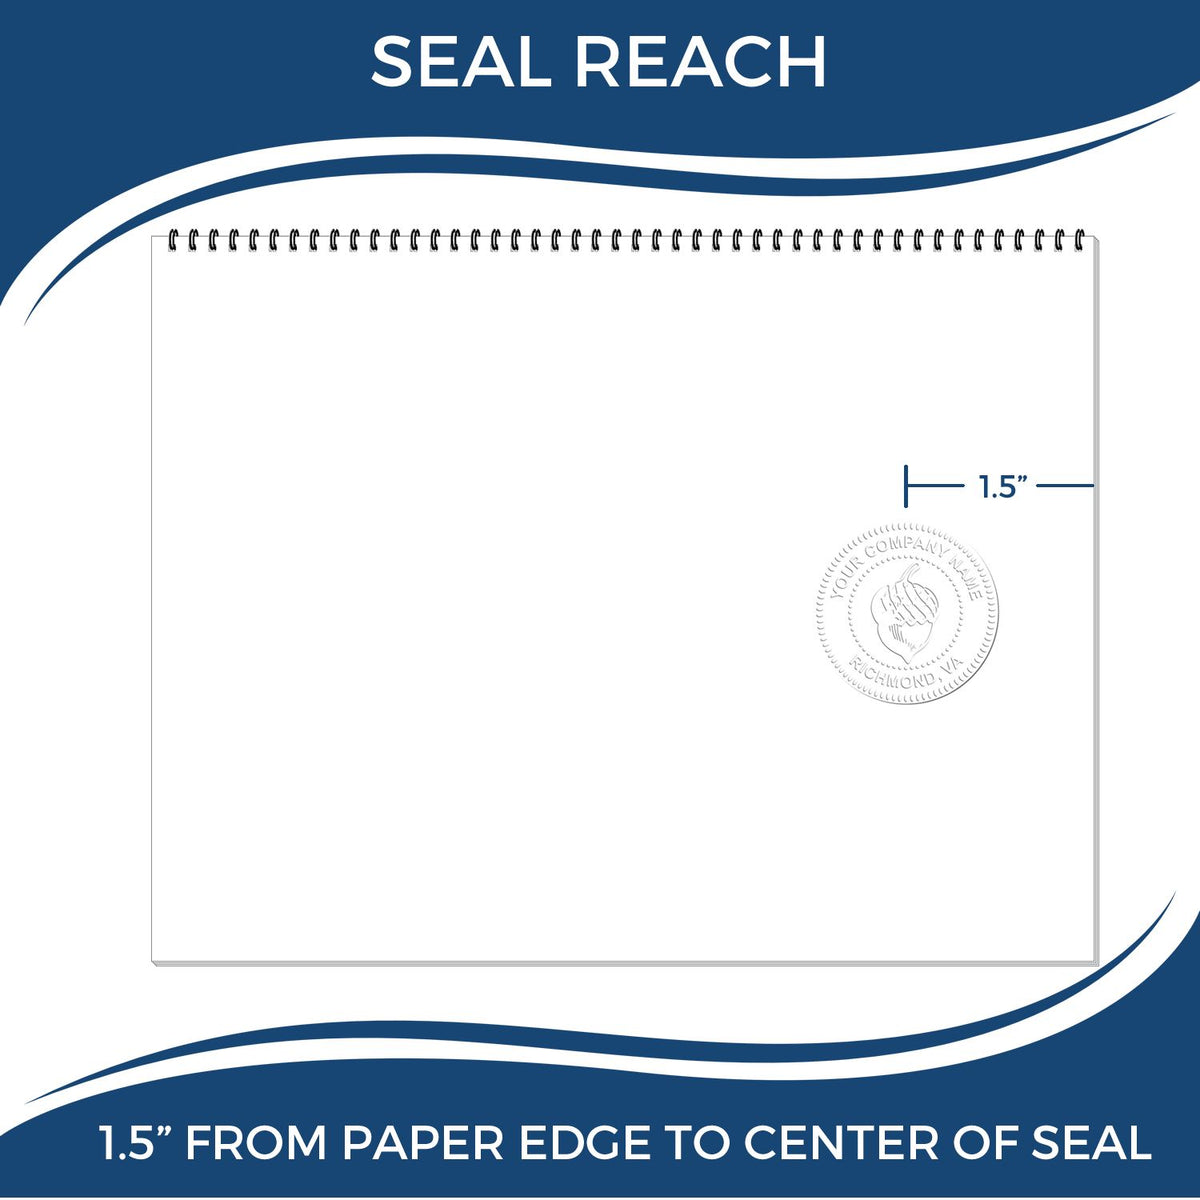 An infographic showing the seal reach which is represented by a ruler and a miniature seal image of the State of West Virginia Soft Land Surveyor Embossing Seal